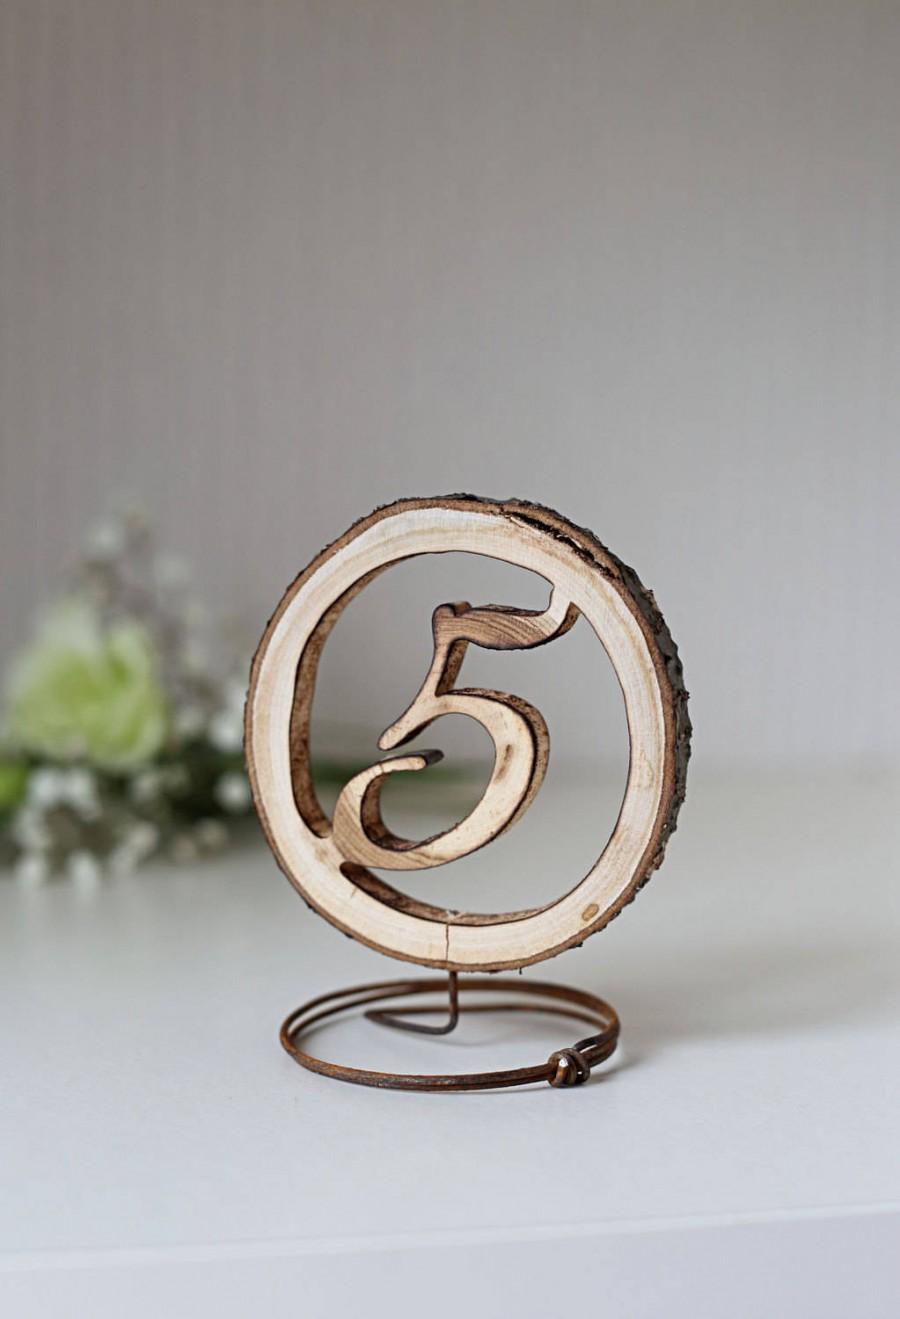 Mariage - Table numbers for wedding, rustic table numbers, free standing table numbers, table numbers, wedding table numbers, event table numbers